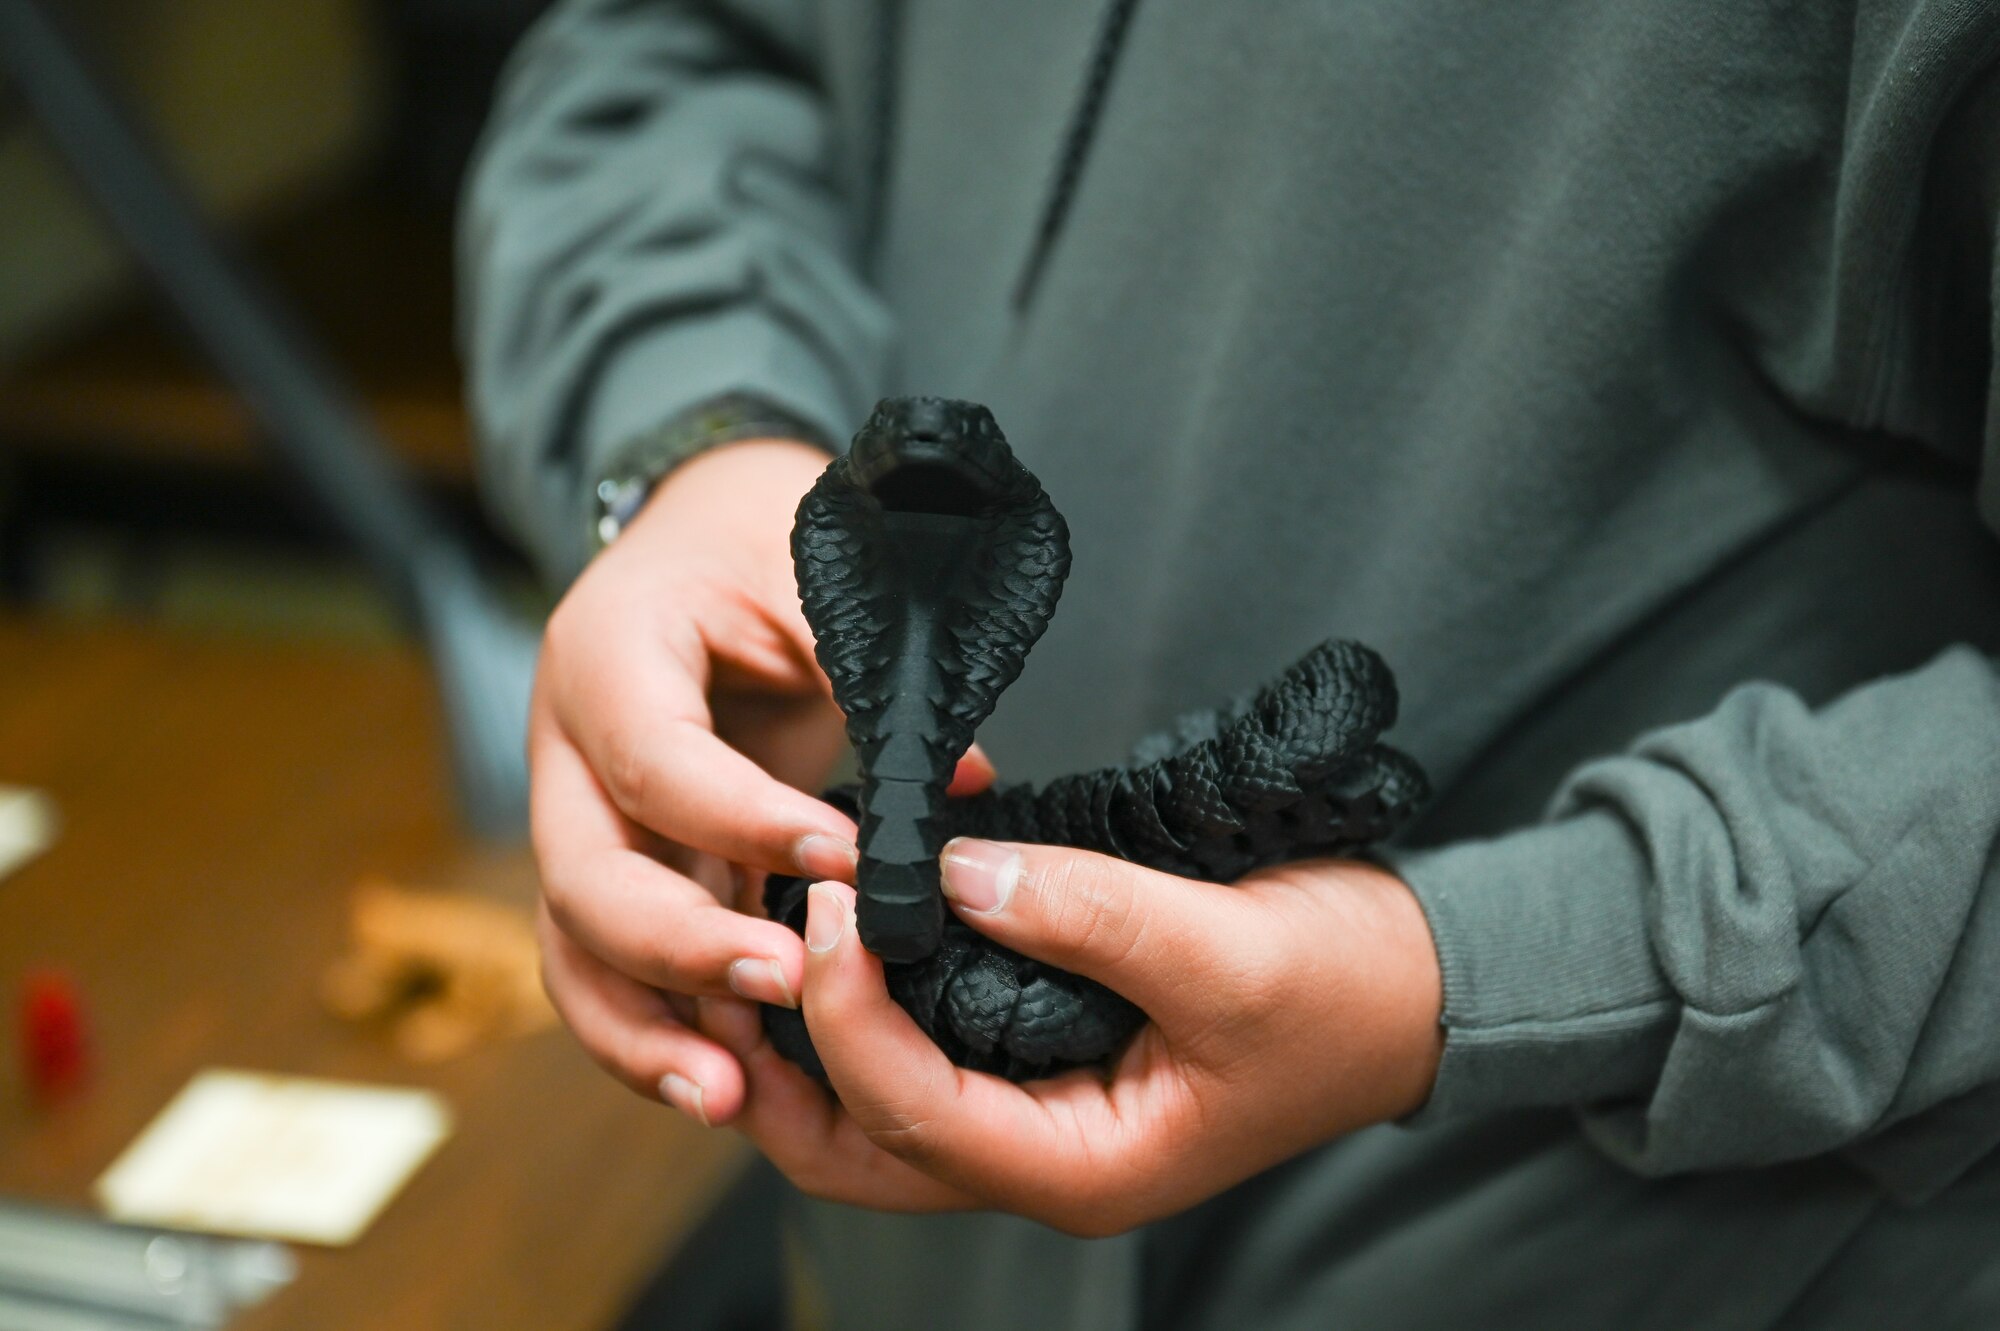 A student from Navajo Public Schools holds a snake figurine created by a 3-D printer during the Aviation Inspiration and Mentorship Wing tour at Altus Air Force Base, Oklahoma, May 10, 2023. The students were able to watch 3-D printers in action while touring the Spark Cell innovation hub. (U.S. Air Force photo by Airman 1st Class Heidi Bucins)